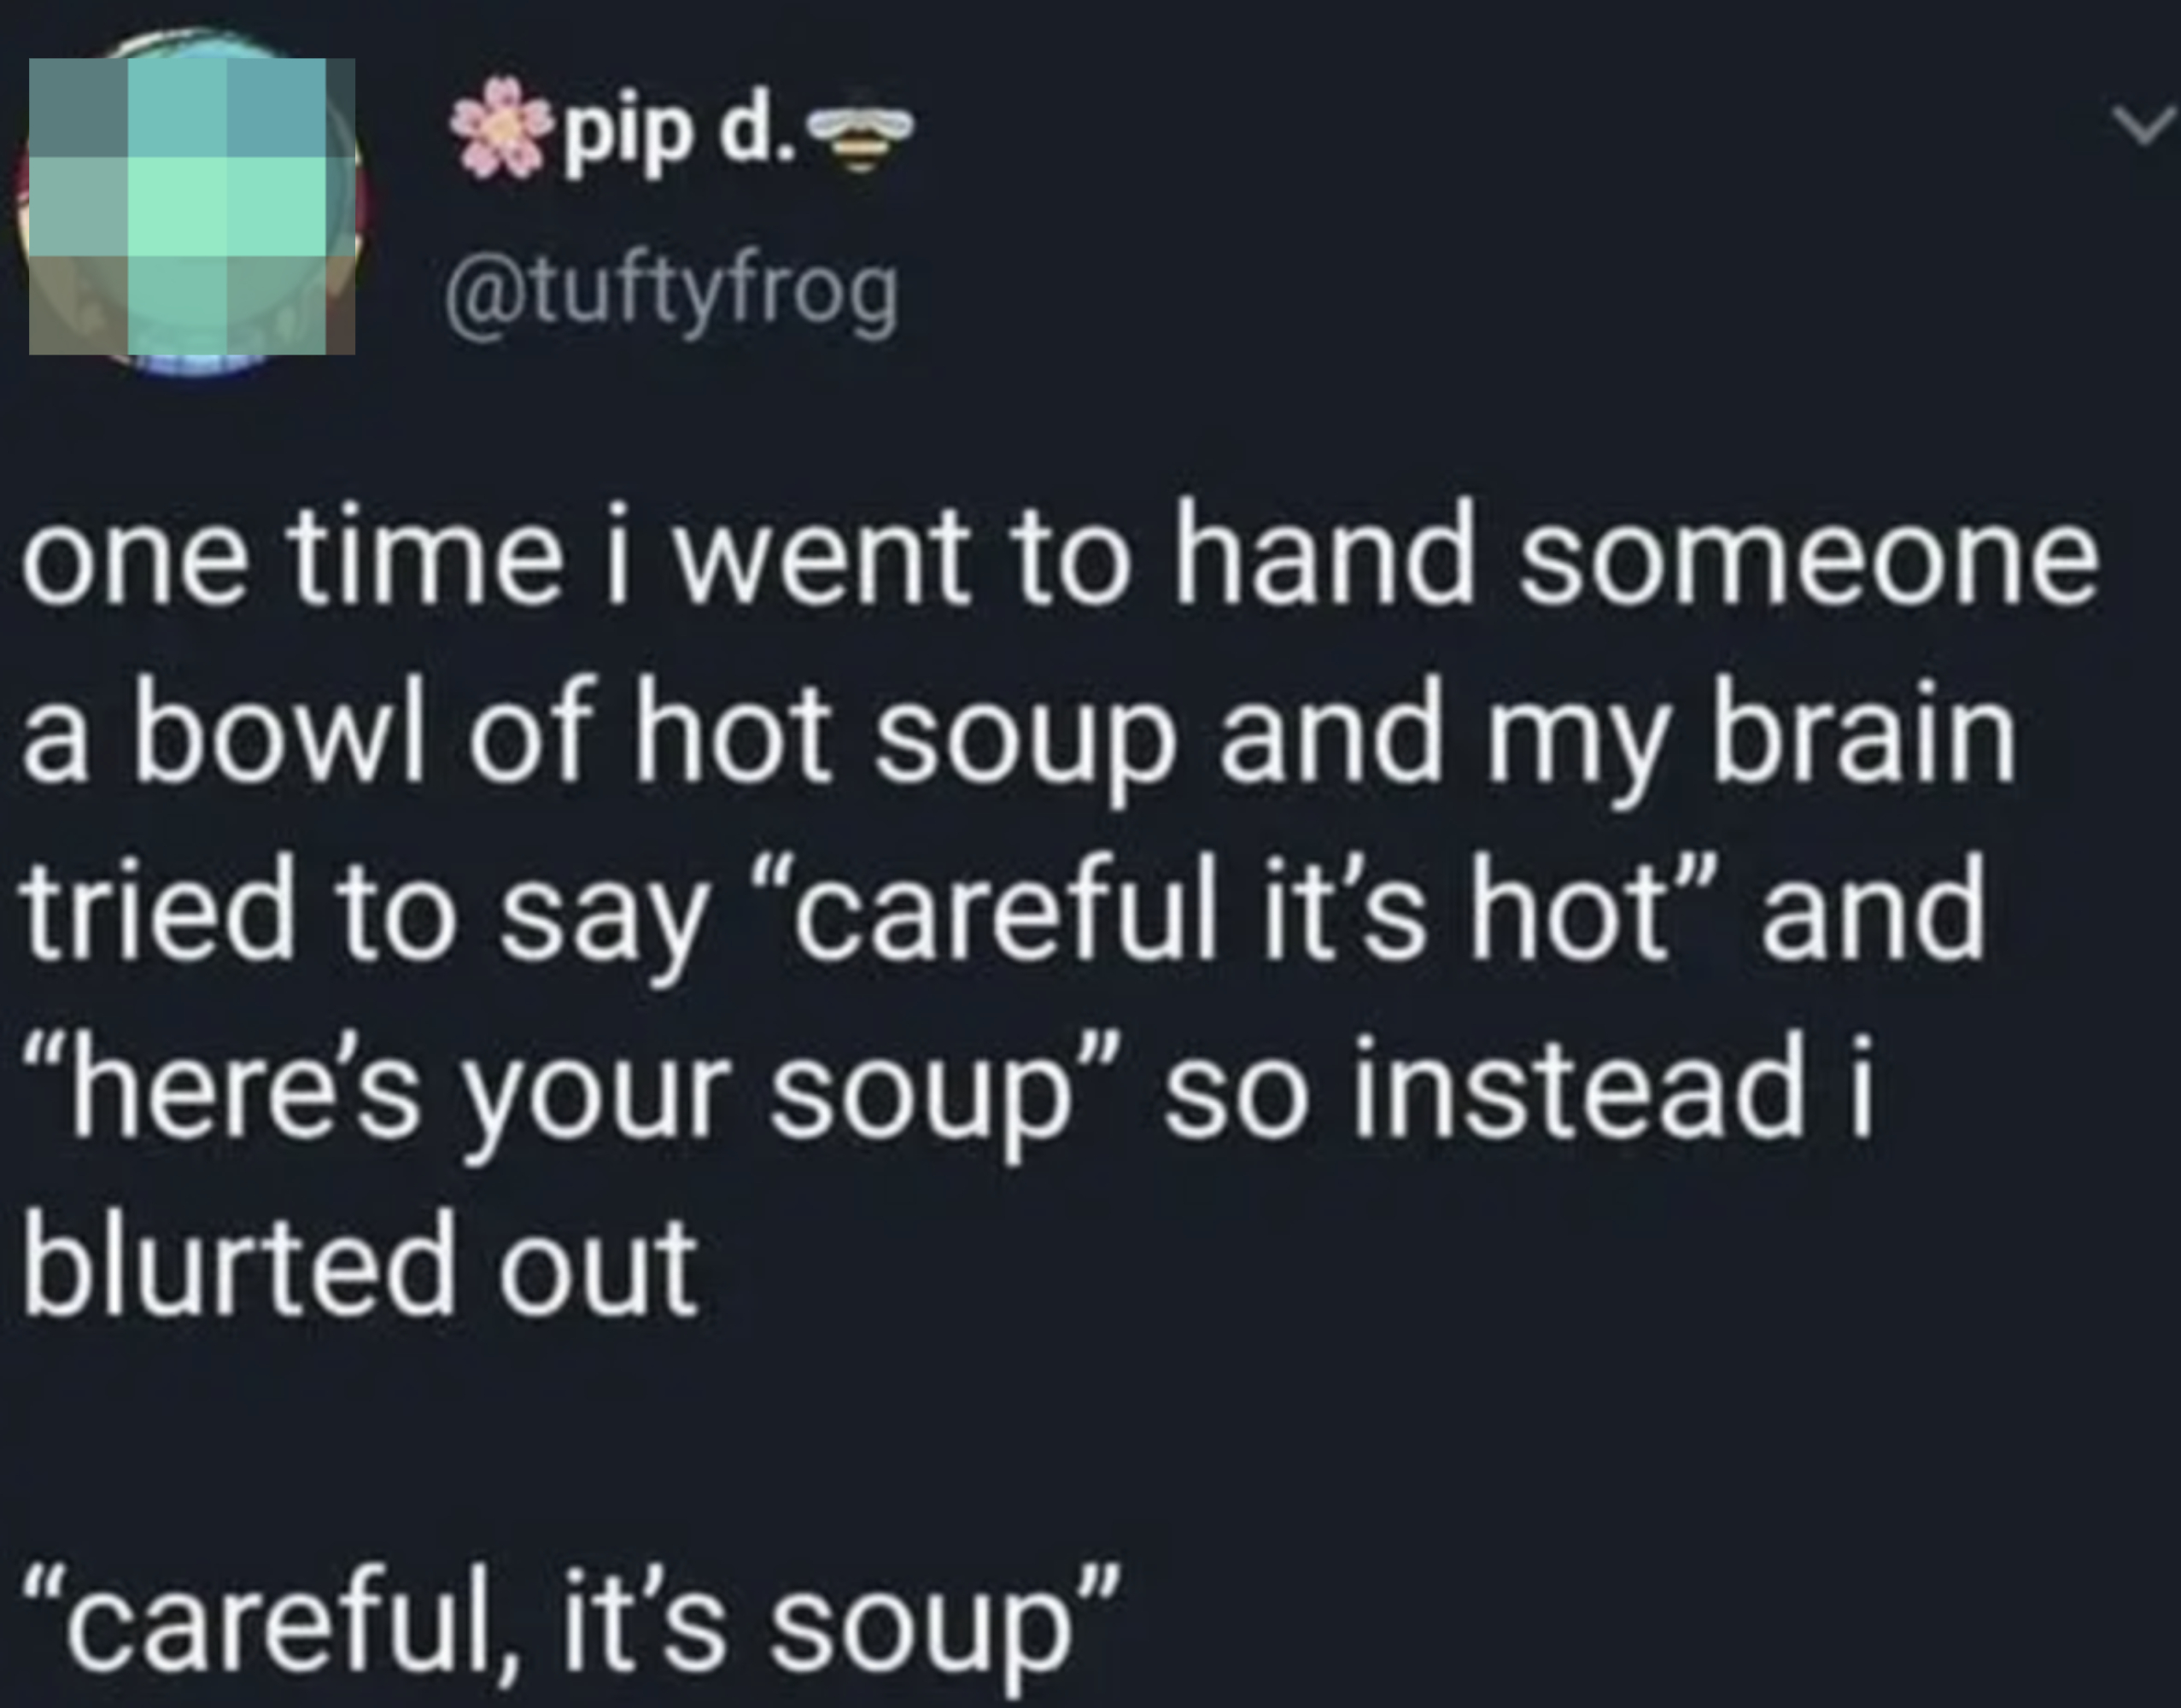 Tweet: &quot;One time i went to hand someone a bowl of hot soup and my brain tried to say &#x27;careful it&#x27;s hot&#x27; and &#x27;here&#x27;s your soup&#x27; so instead i blurted out &#x27;careful, it&#x27;s soup&#x27;&quot;